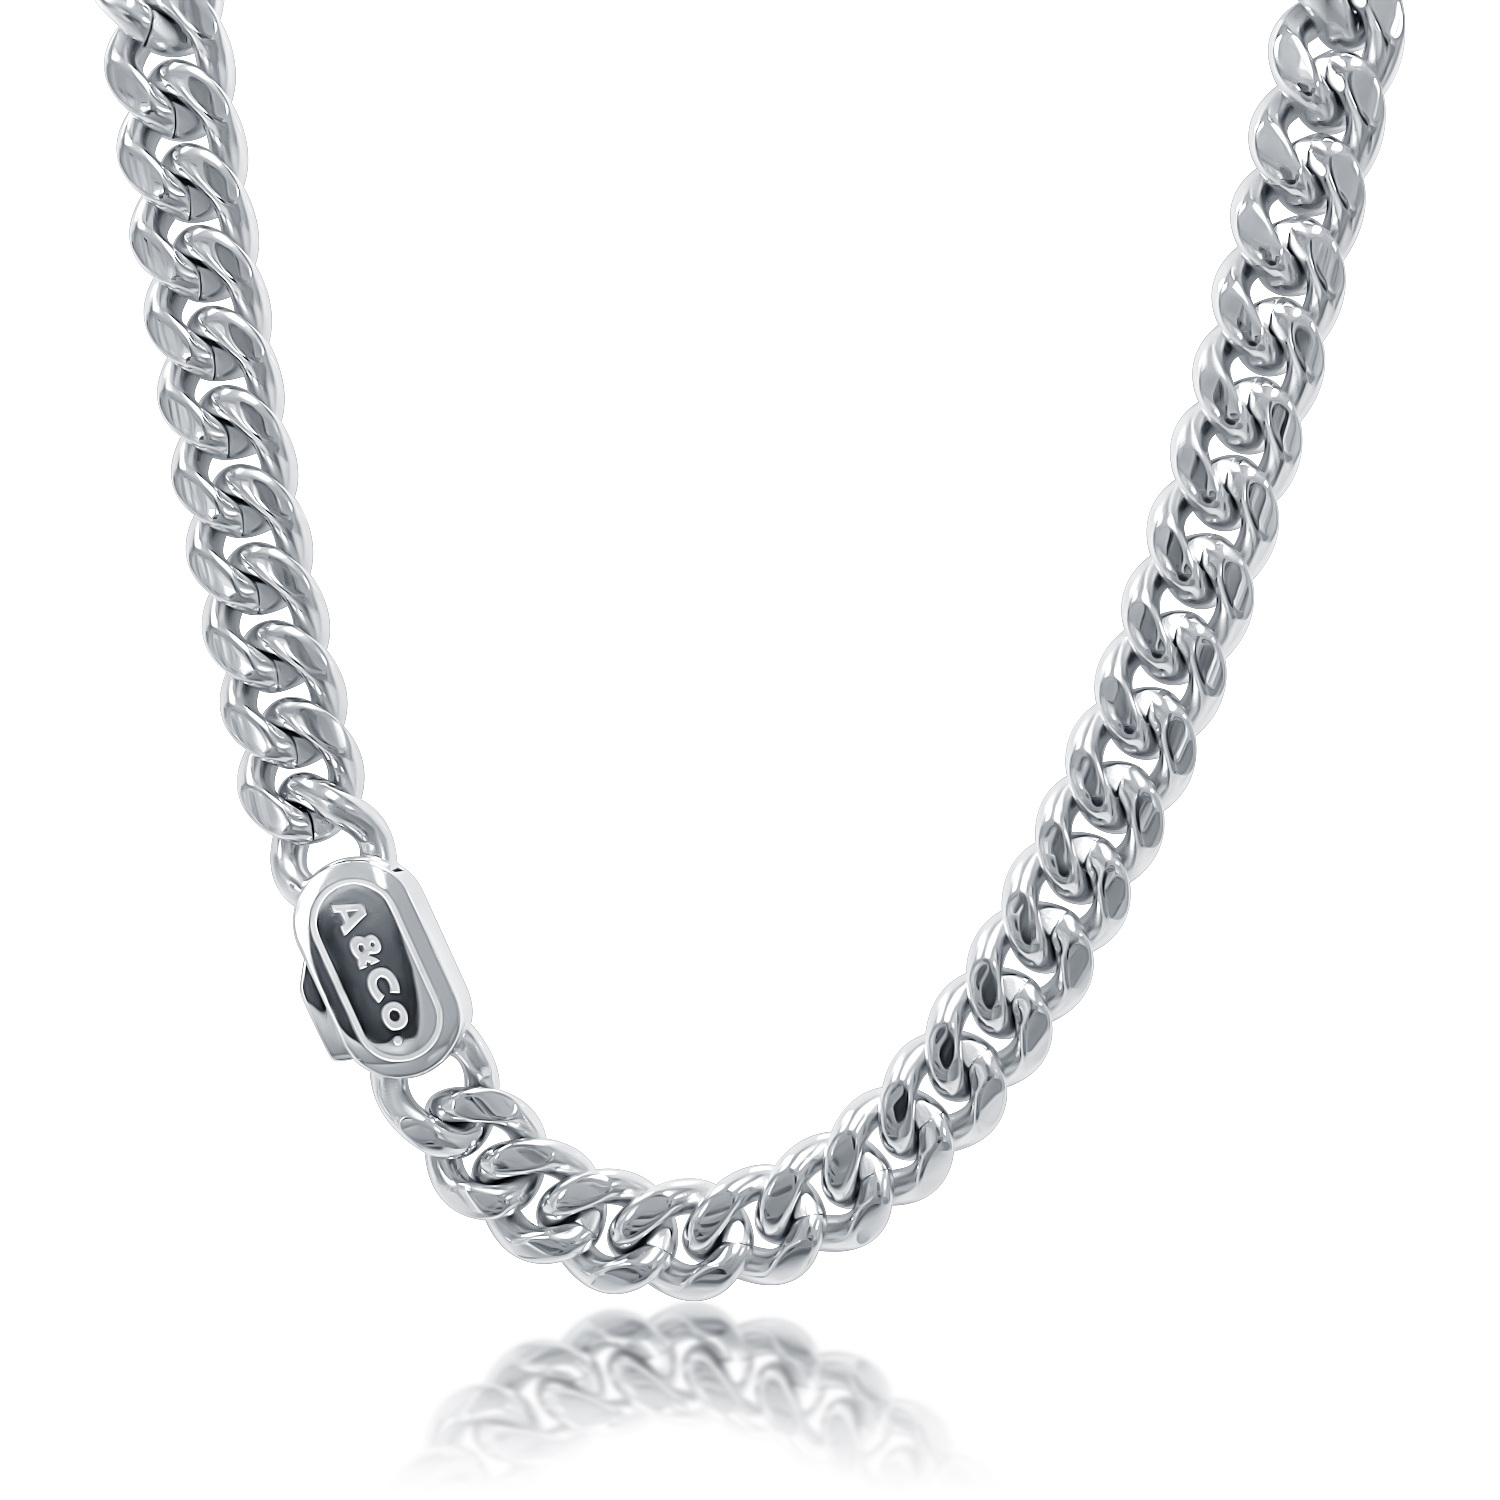 Chain Necklaces for Men | Men necklace, Jewelry photography styling, Jewelry  design necklace